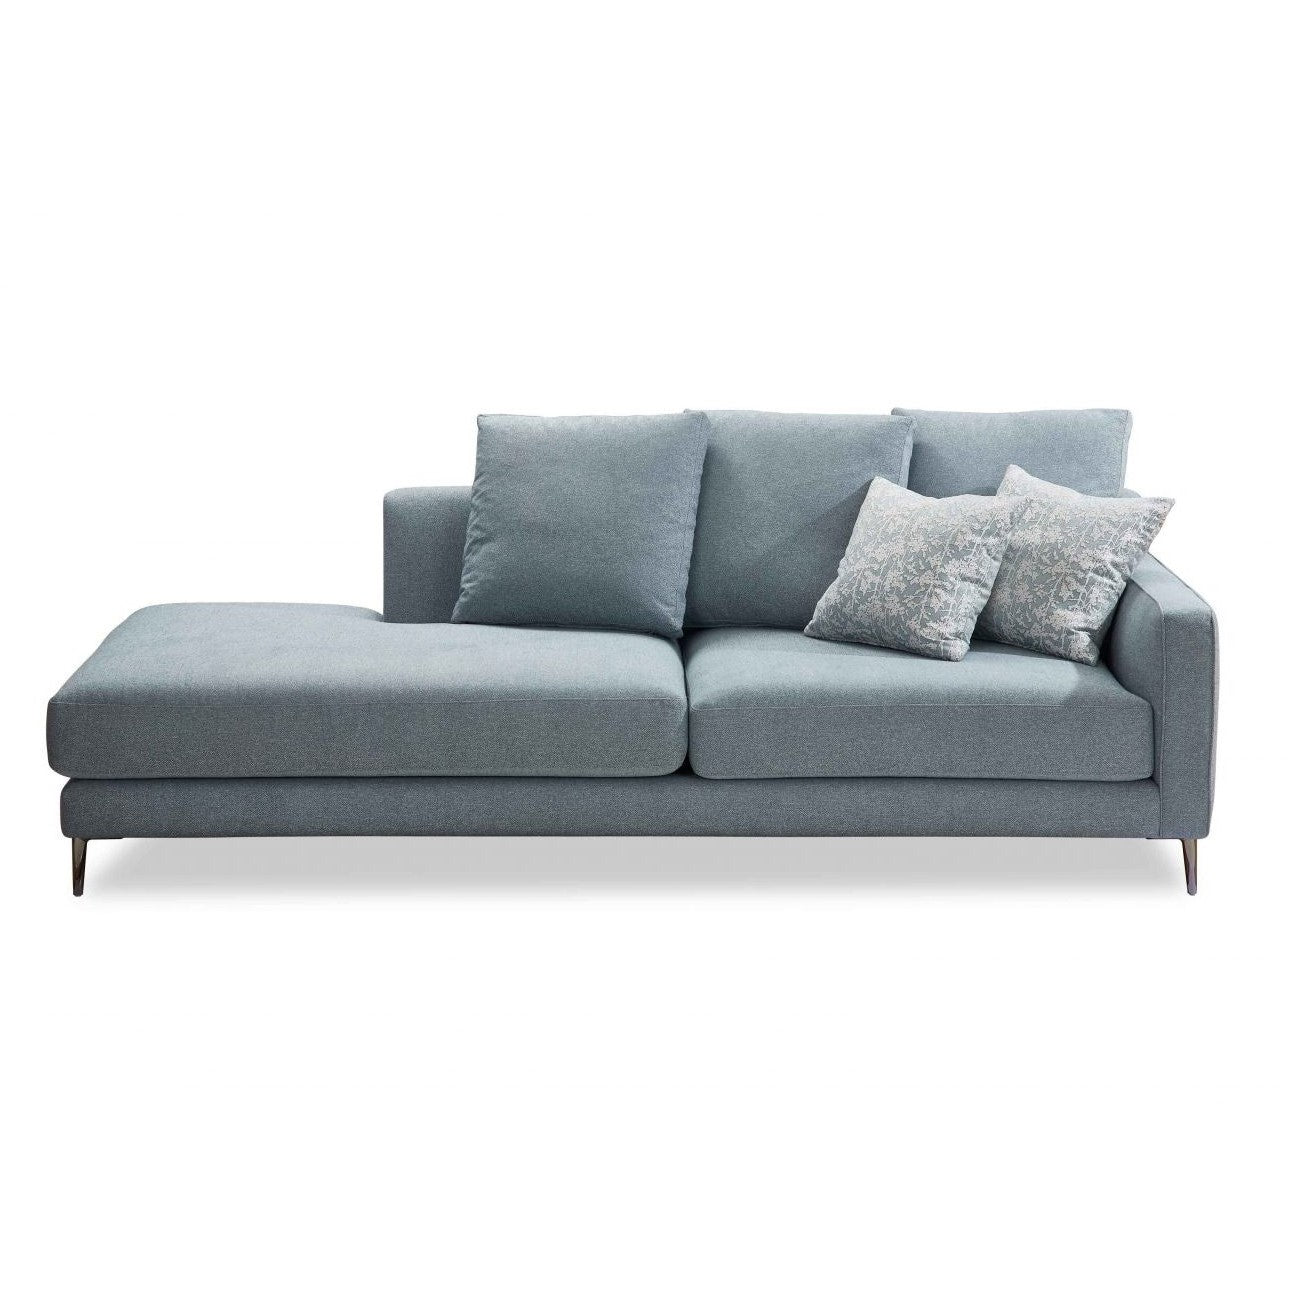 Parker Daybed Sofa by Molmic available from Make Your House A Home, Furniture Store located in Bendigo, Victoria. Australian Made in Melbourne.